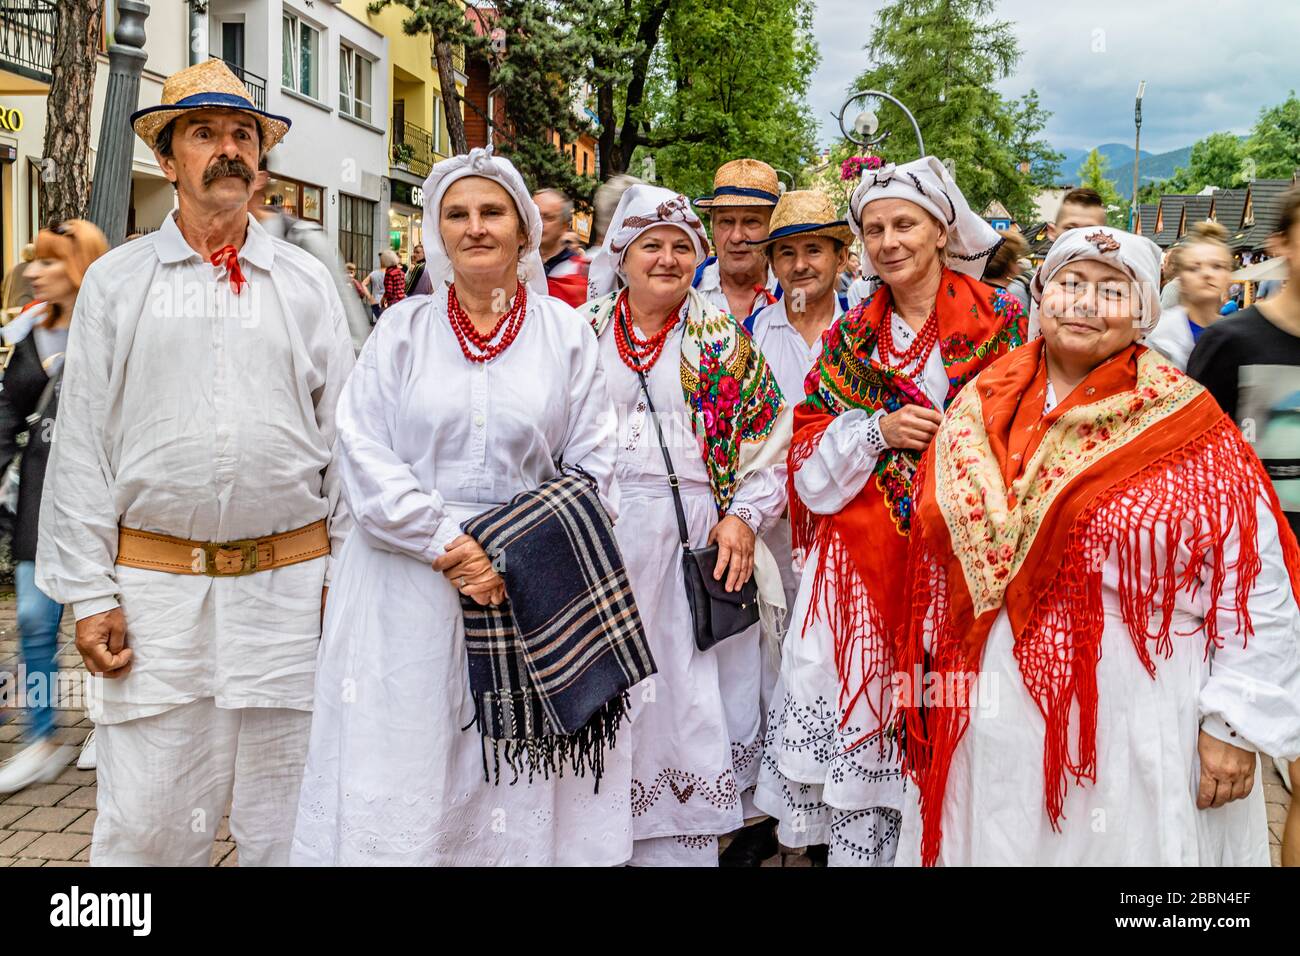 A group of people wearing a version of traditional costume in Zakopane town centre, Zakopane, southern Poland. July 2017. Stock Photo